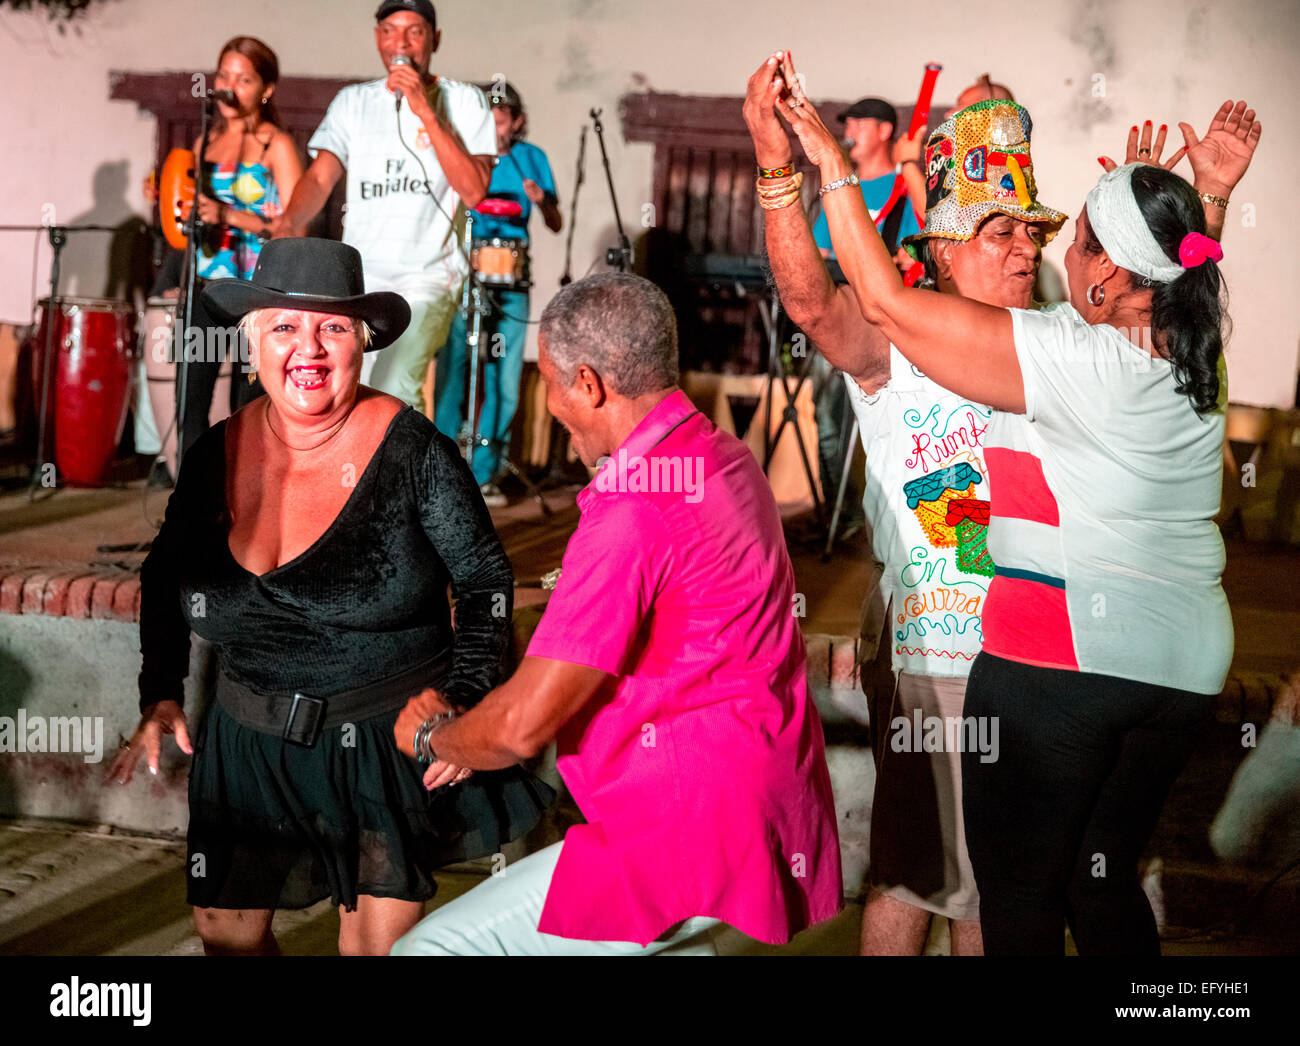 Elderly Cubans enjoying salsa dancing to the music of a live band, at a market in Trinidad, Sancti Spíritus Province, Cuba Stock Photo